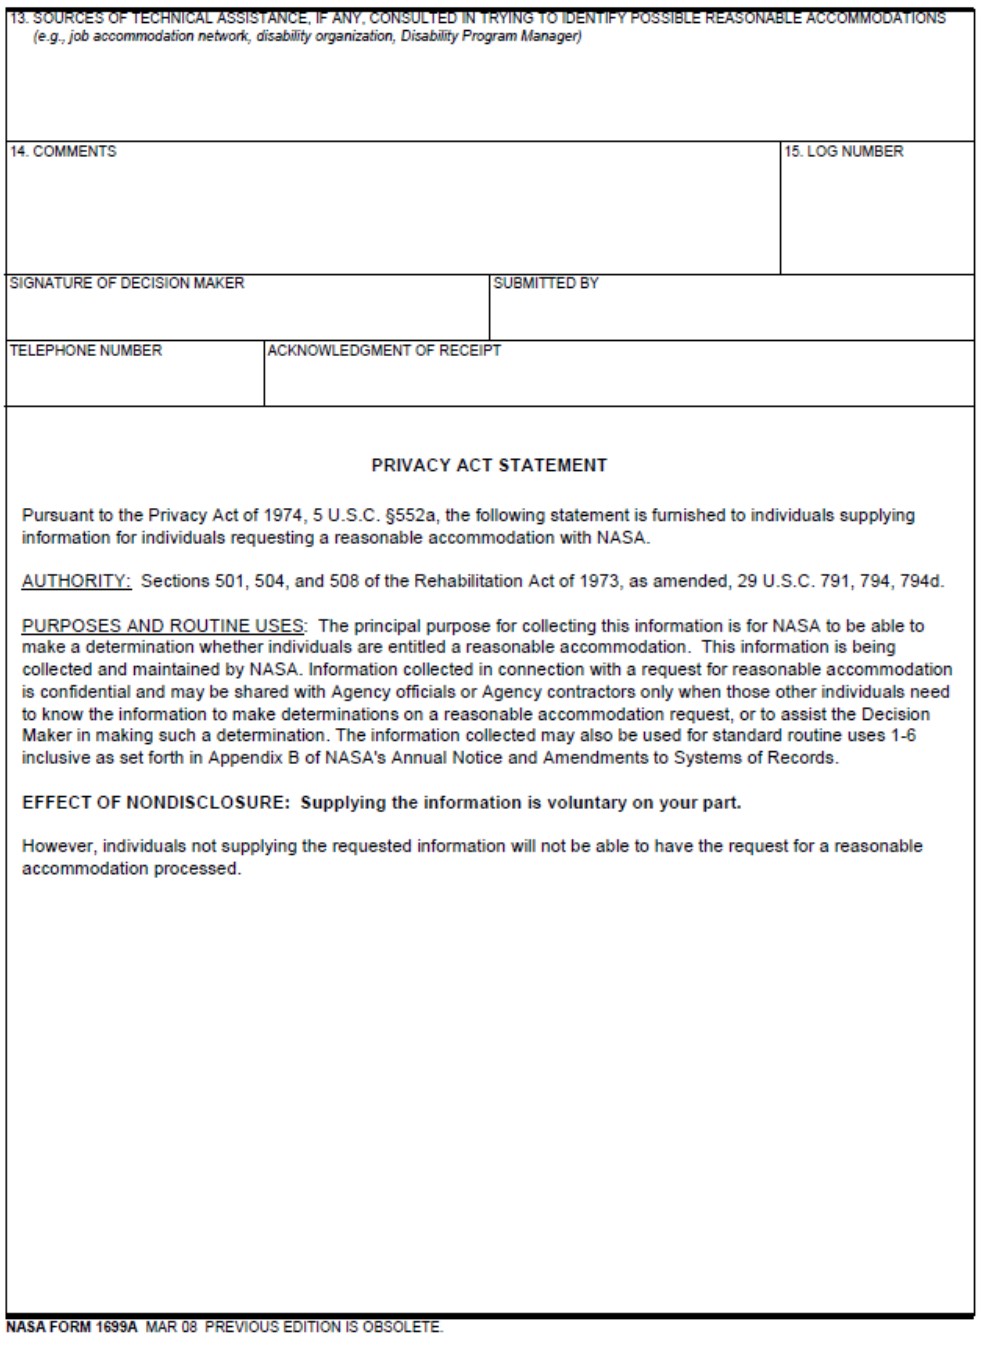 Figure F.2 image shows page 2 of the NF1699A Disposition of Reasonable Accommodation Request.